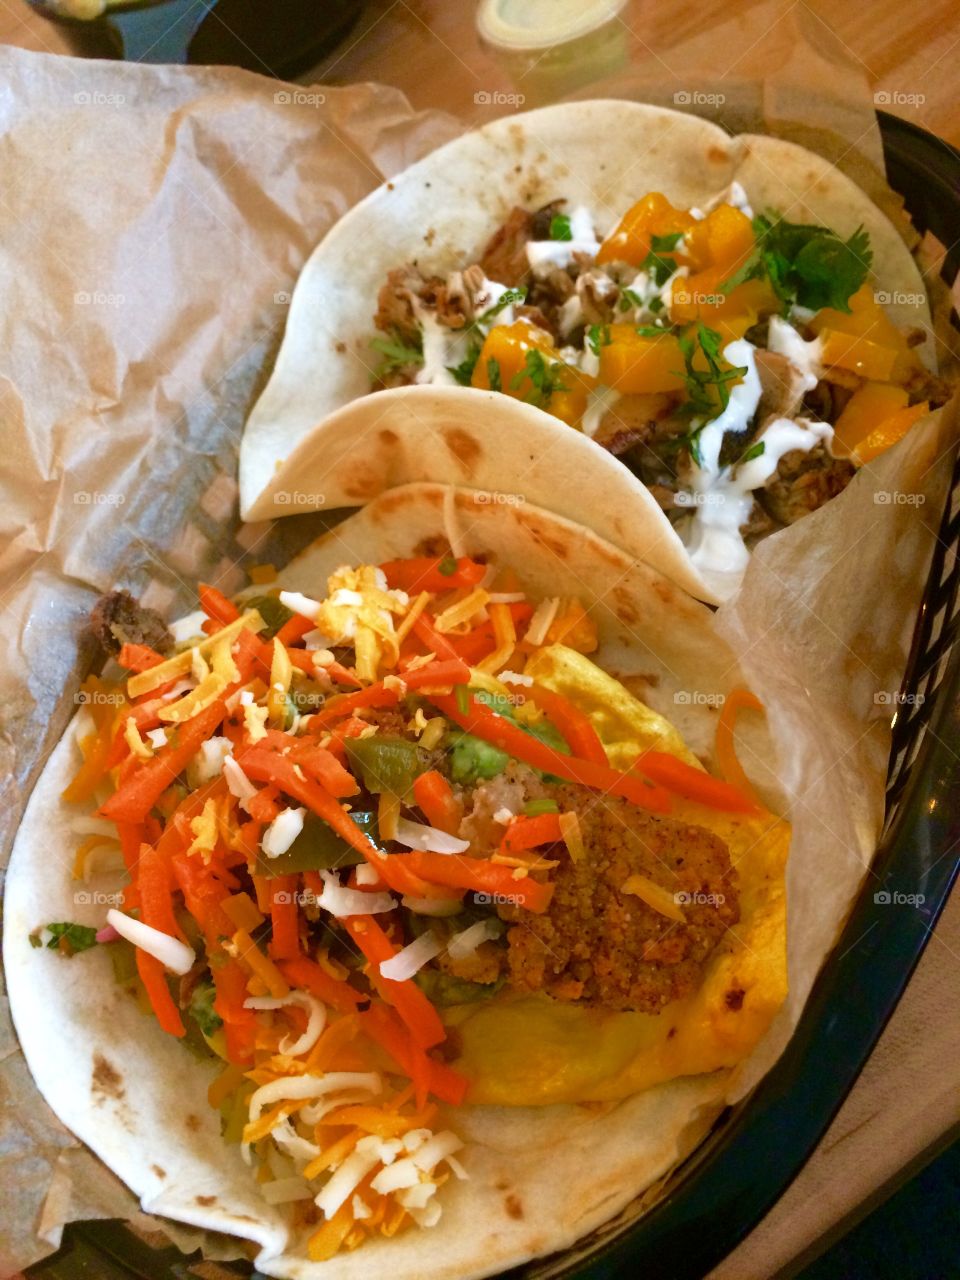 Mouthwatering Delicious Tacos!!!!!!!!!!!!!!